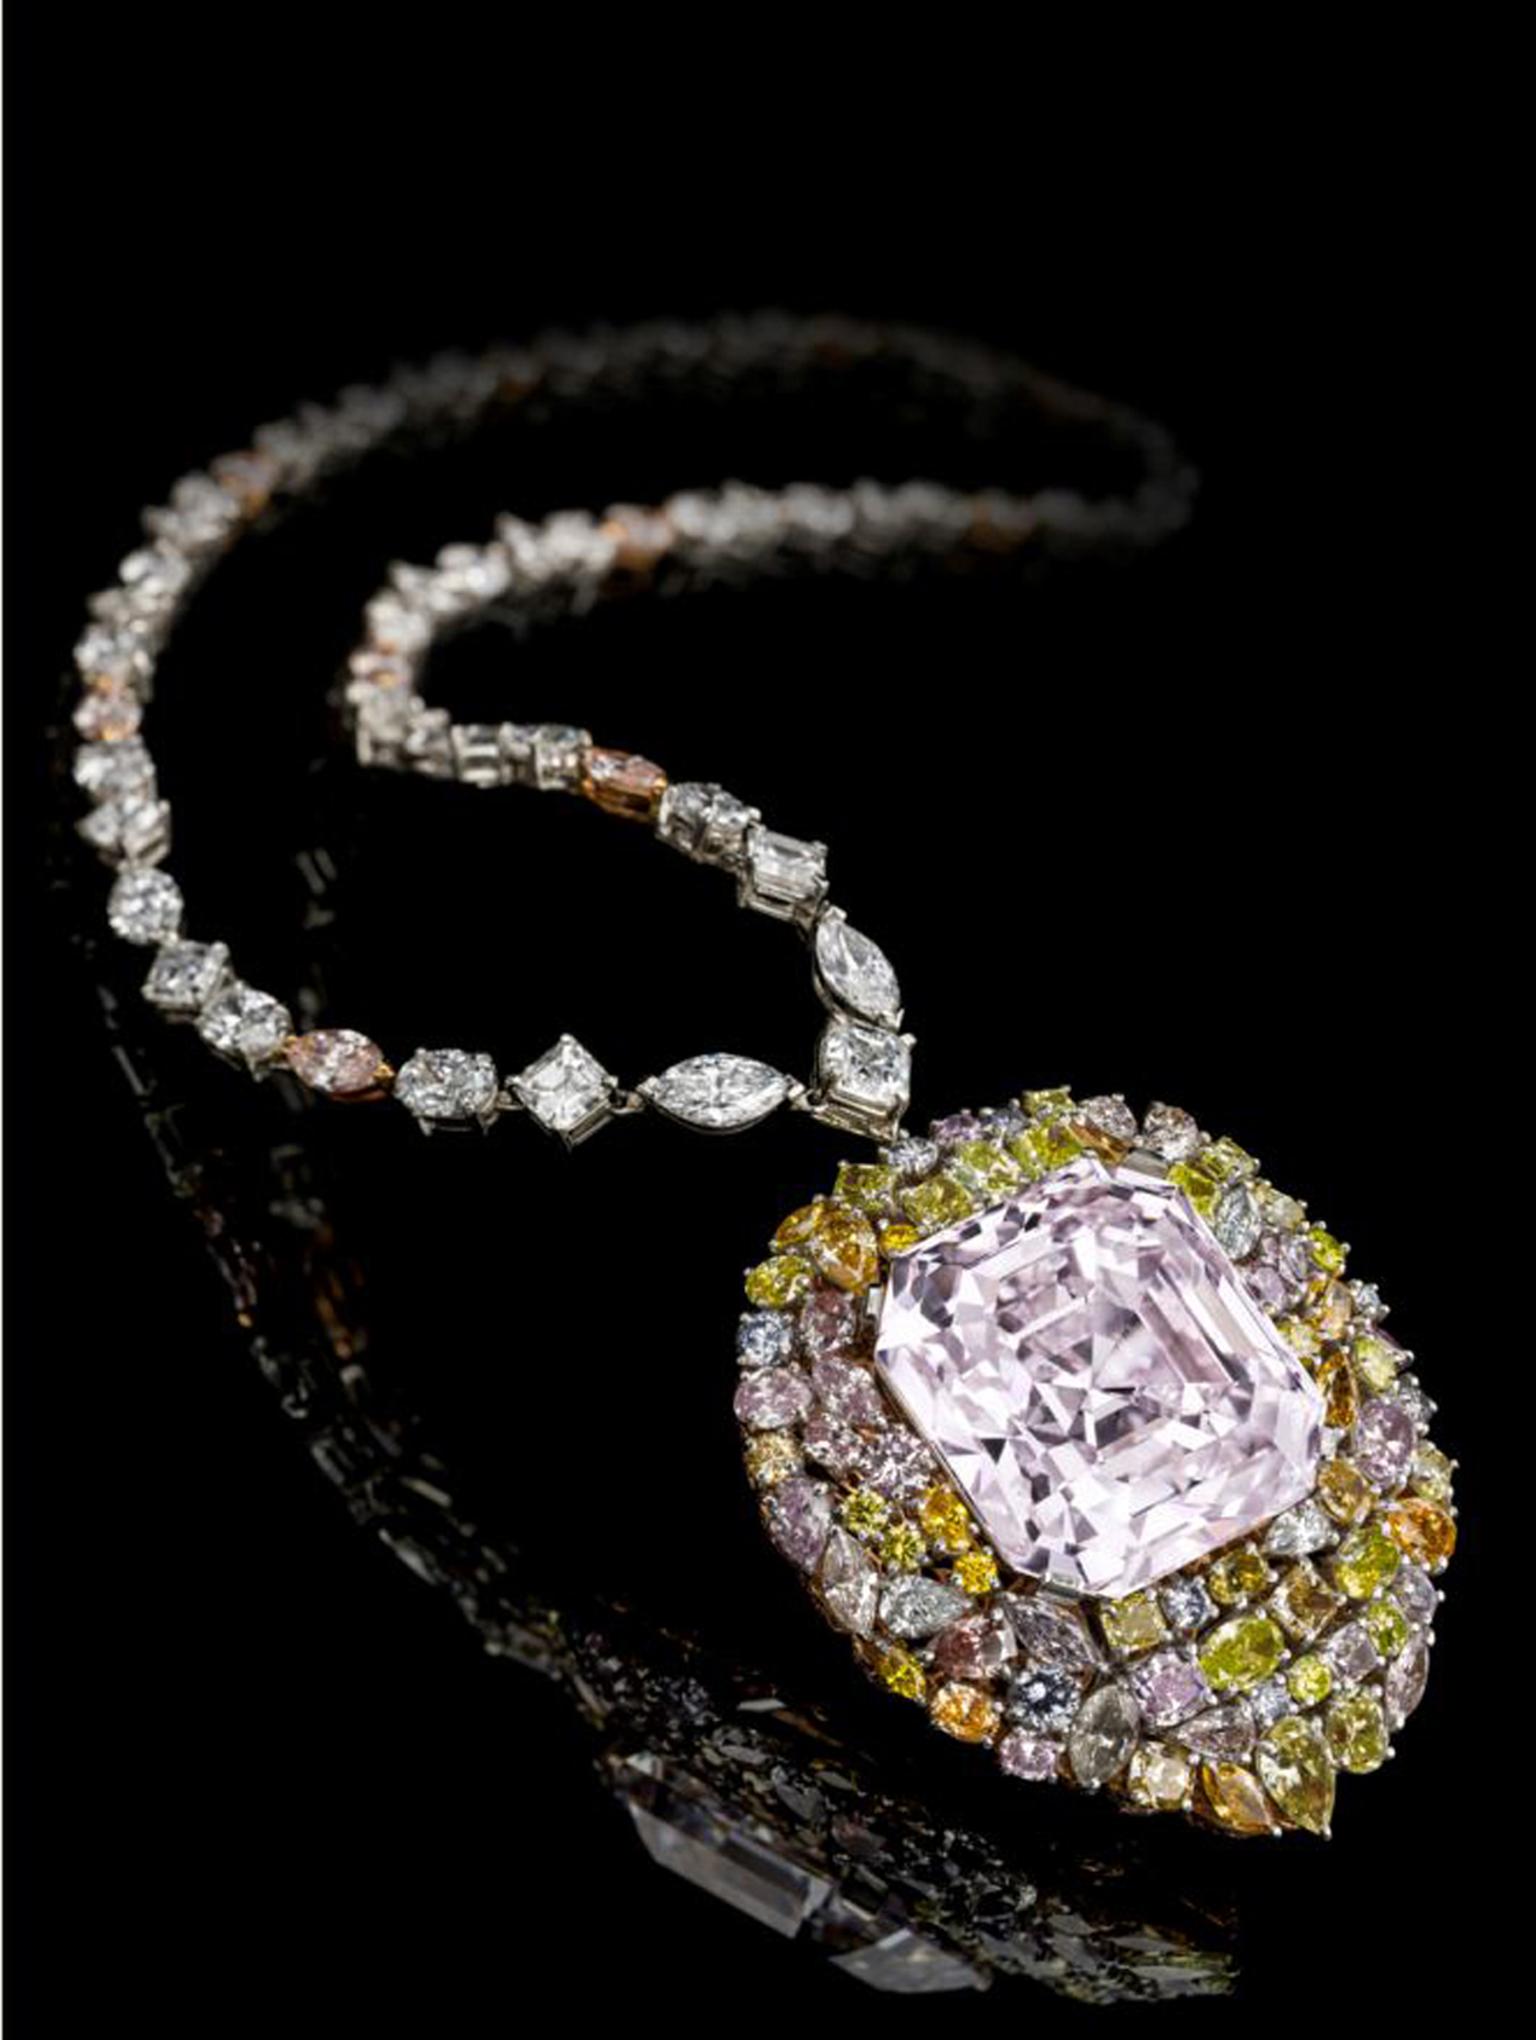 David Warren also talks about the other important lots in the Magnificent Jewels auction at Christie's Geneva in May, including this 76ct light pink diamond, which is an extraordinary size for a pink diamond